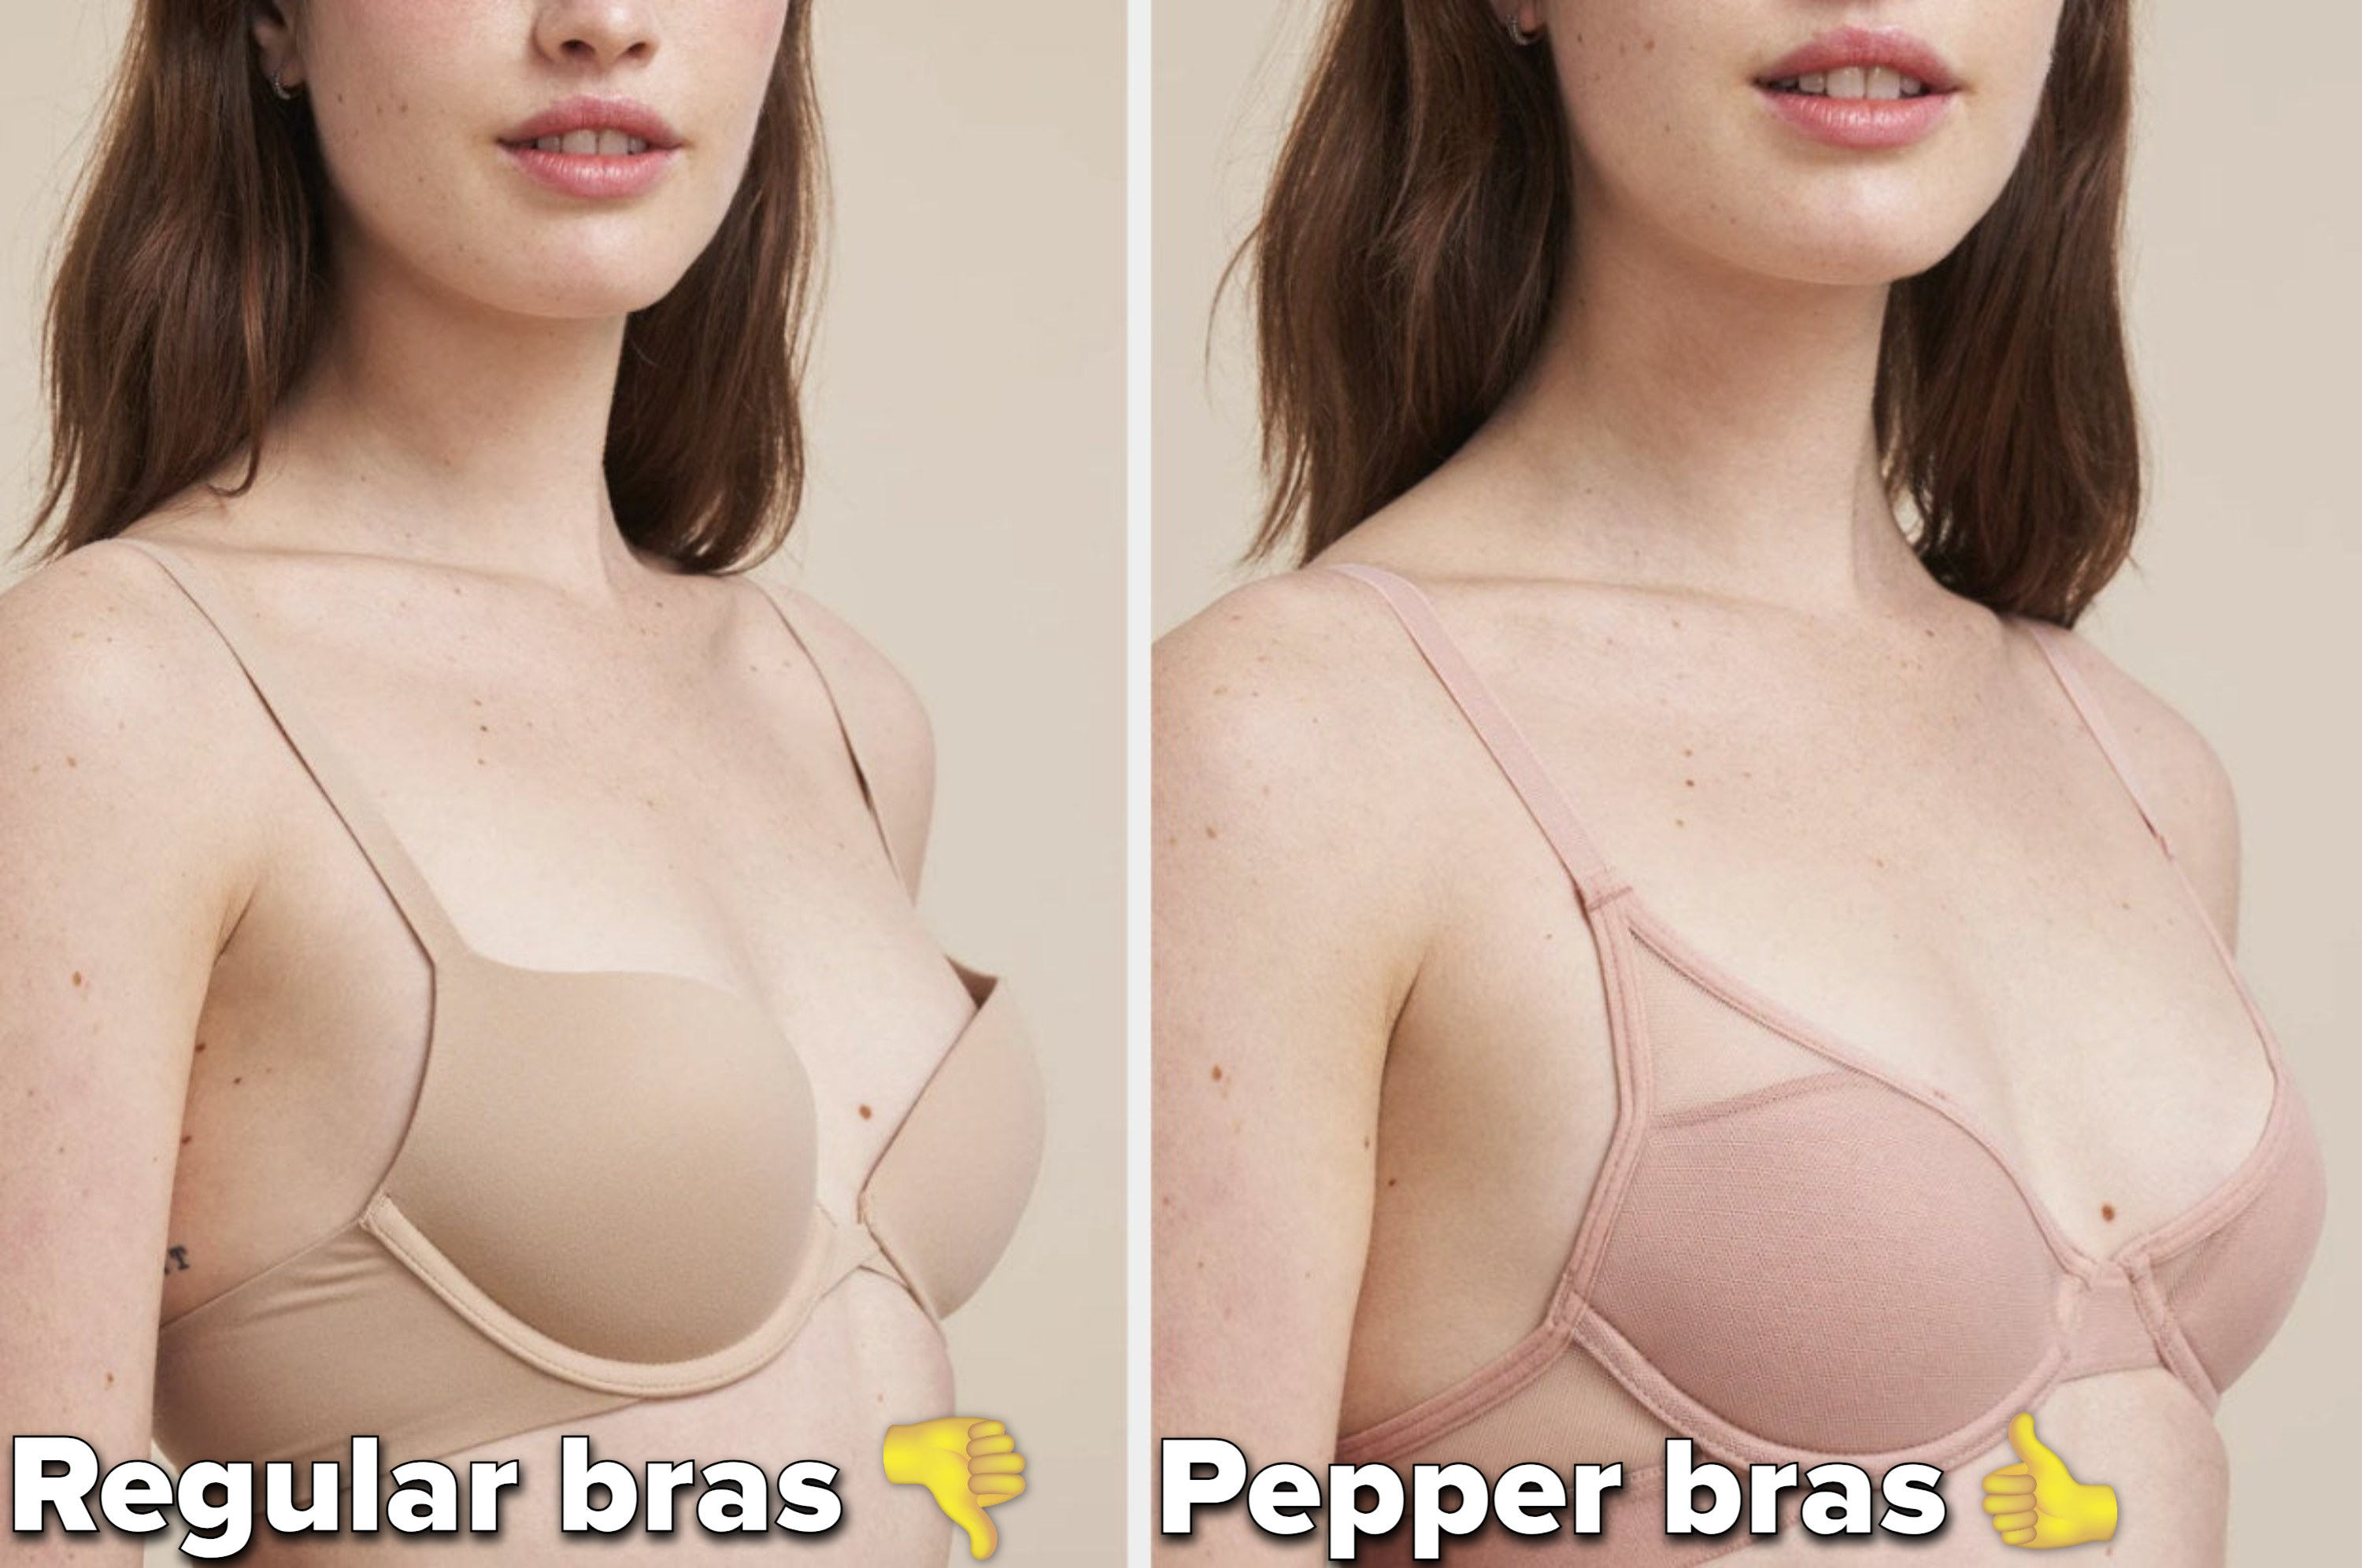 31 Products So Nice You'll Probably Buy 'Em Twice